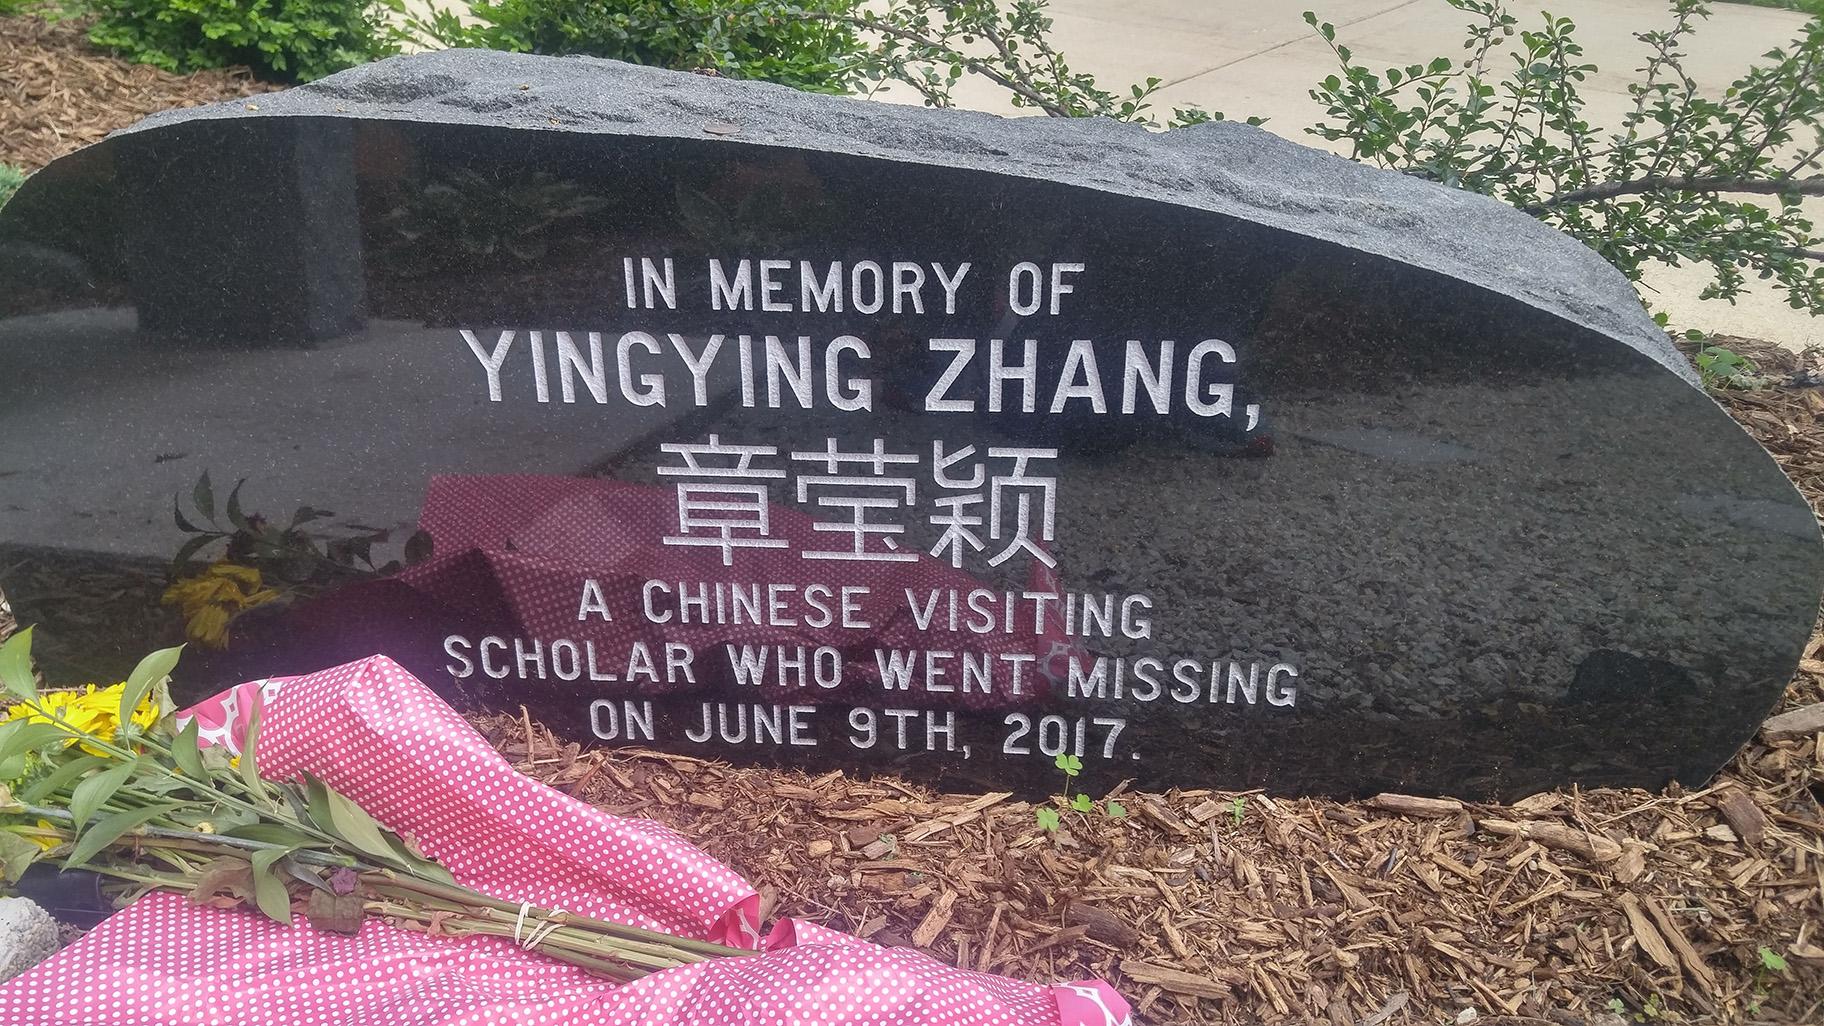 A memorial stone engraved with Yingying Zhang’s name in both English and Chinese is adorned with flowers on the campus of the University of Illinois at Urbana-Champaign on Friday, June 7, 2019. Zhang was last seen alive at a nearby bus stop on Friday, June 9, 2017. (Photo by Mark Van Moer)